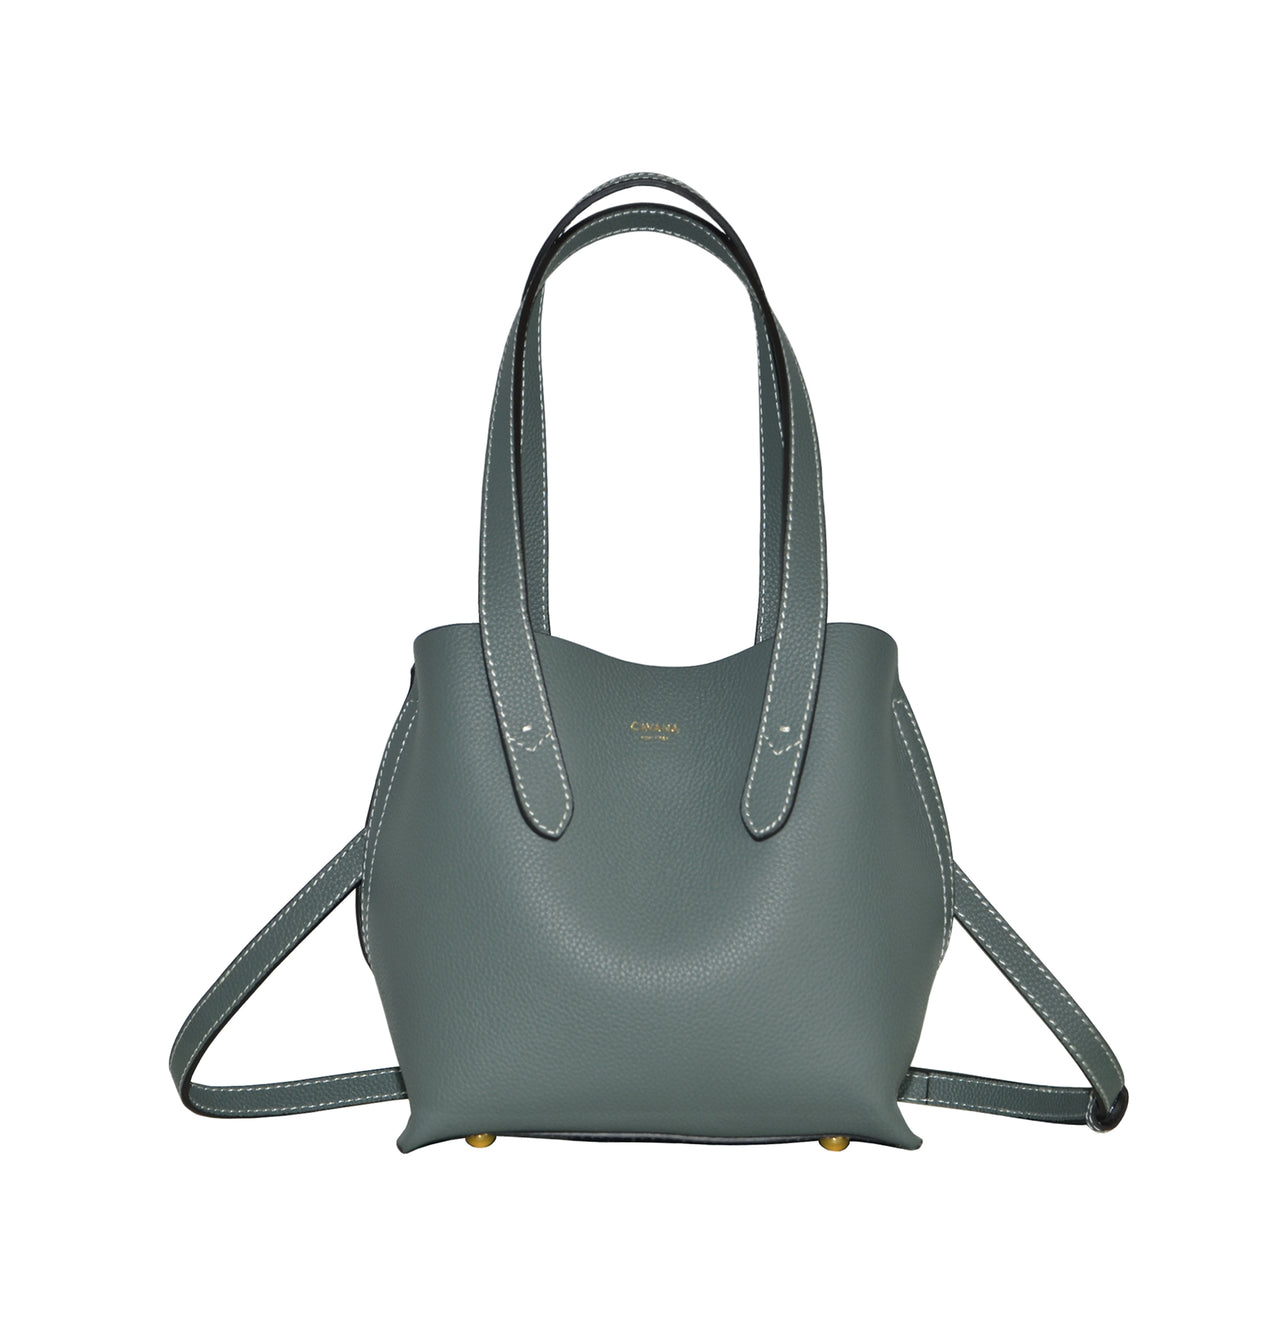 ARCO BAG IN ALMOND-GREEN